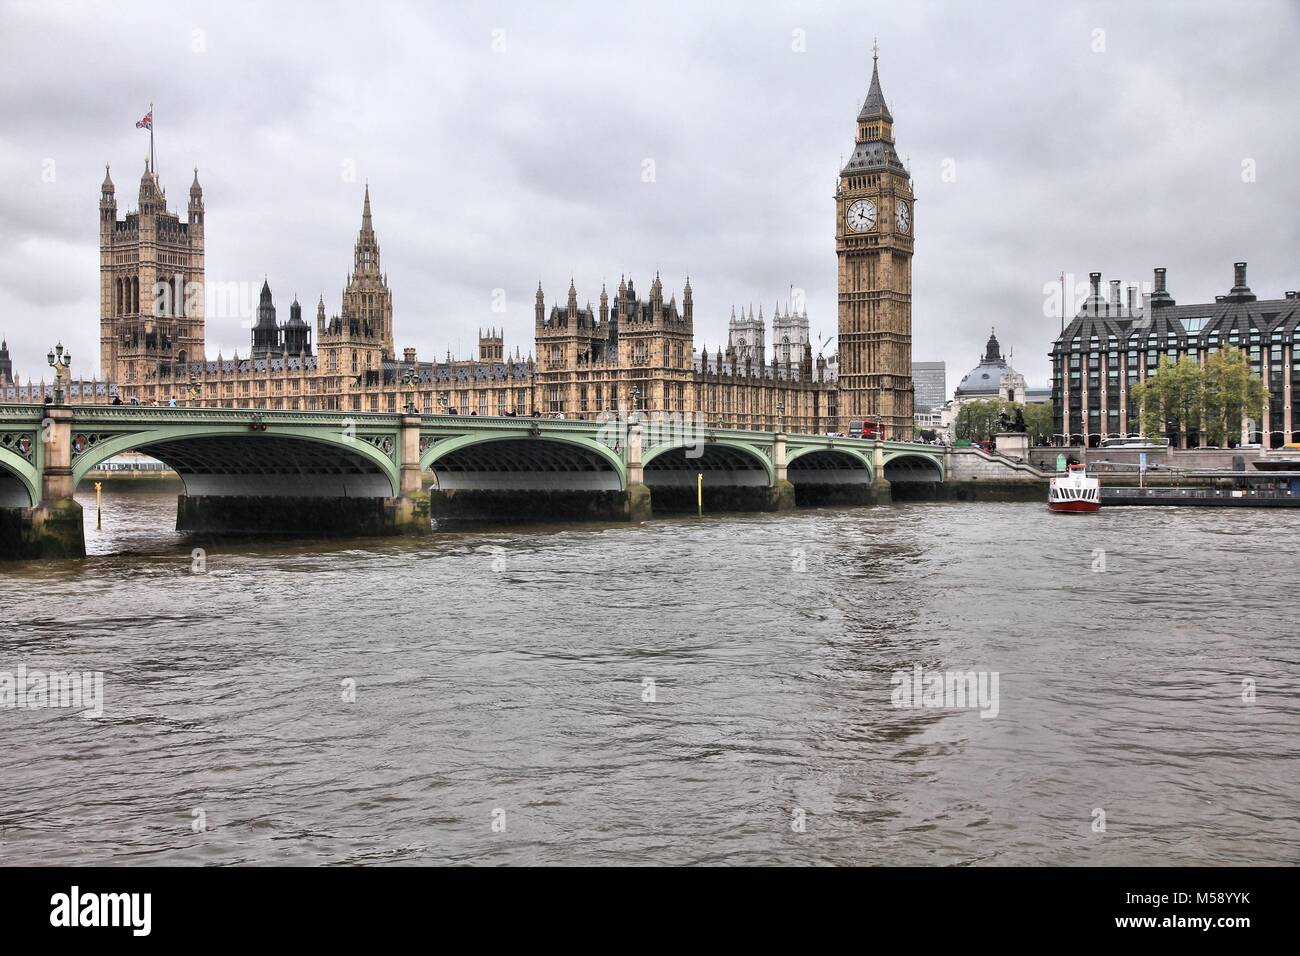 London, United Kingdom - rainy day view of Palace of Westminster (Houses of Parliament) with Big Ben clock tower and Victoria Tower. UNESCO World Heri Stock Photo